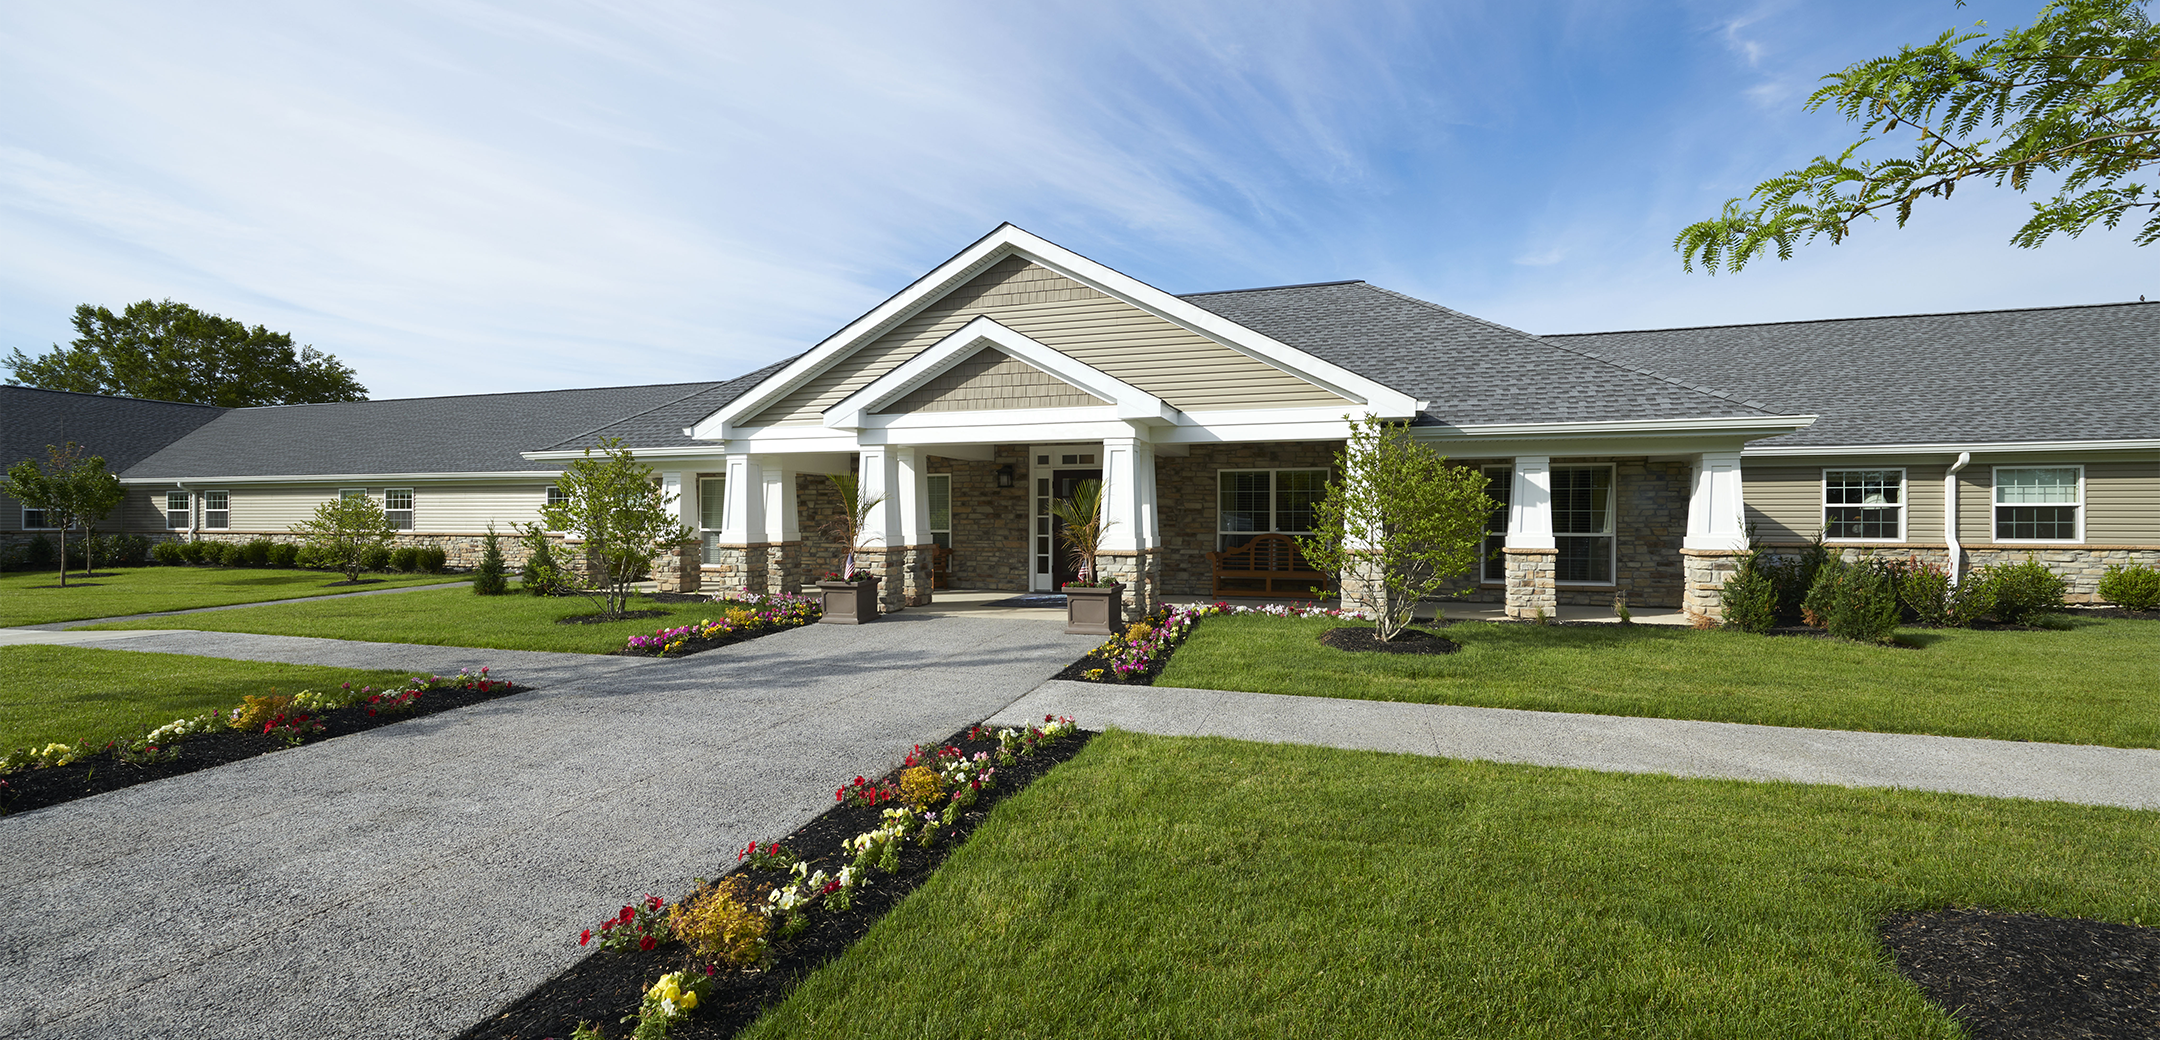 An exterior view of the Artis Senior Living single floor stone brick design building showcasing the overhang triangular design with a grass front lawn and sidewalk going across it.